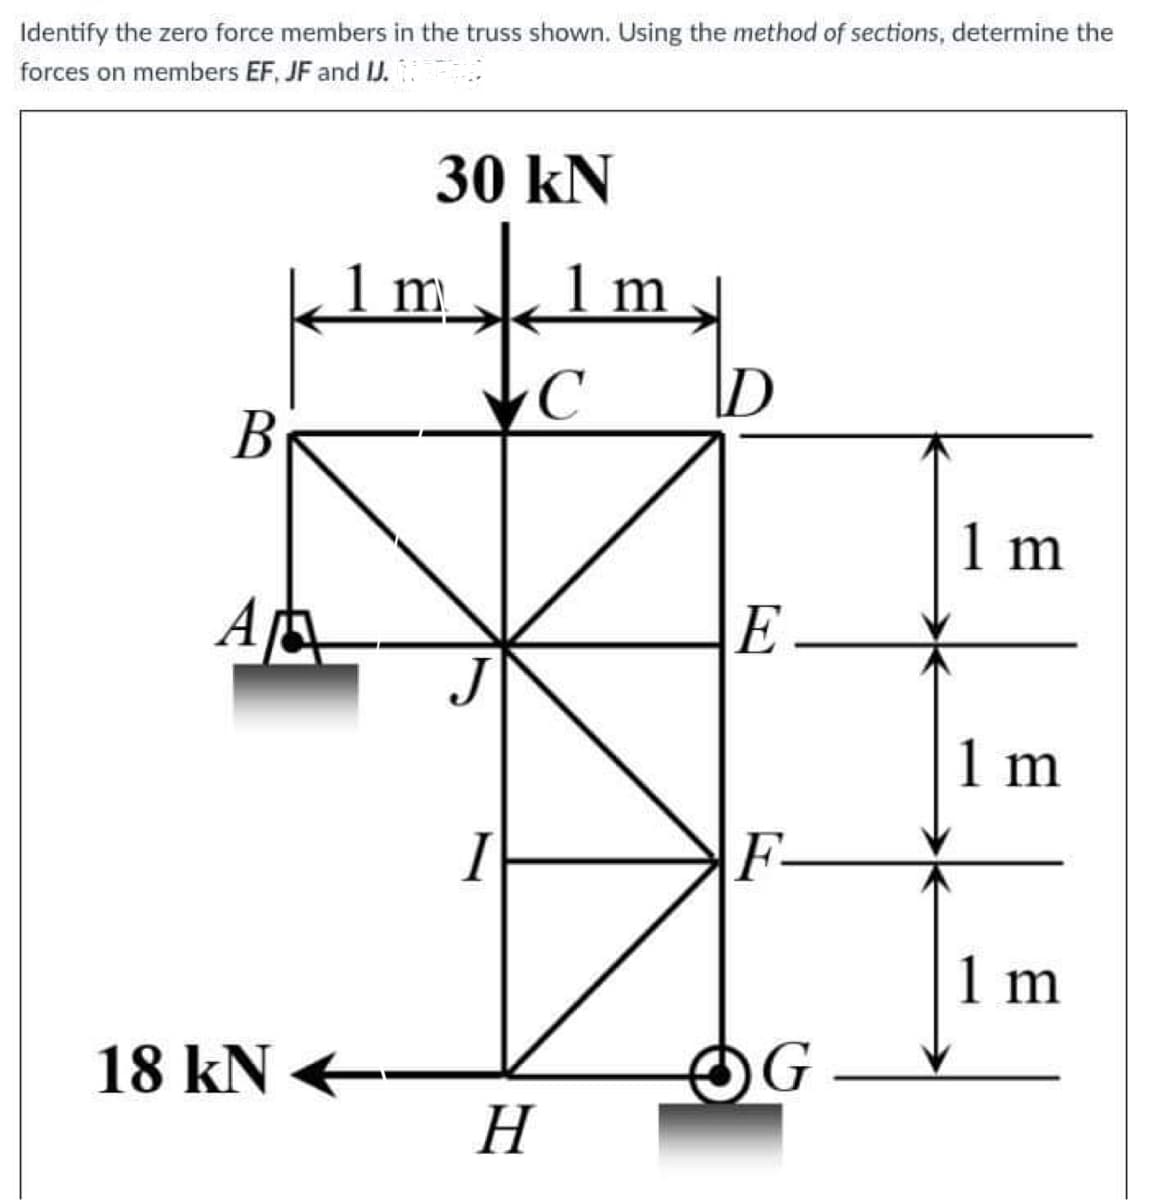 Identify the zero force members in the truss shown. Using the method of sections, determine the
forces on members EF, JF and J.
30 kN
m
1 m
D
В
1 m
A
E
1 m
F-
1 m
18 kN +
OG
H
